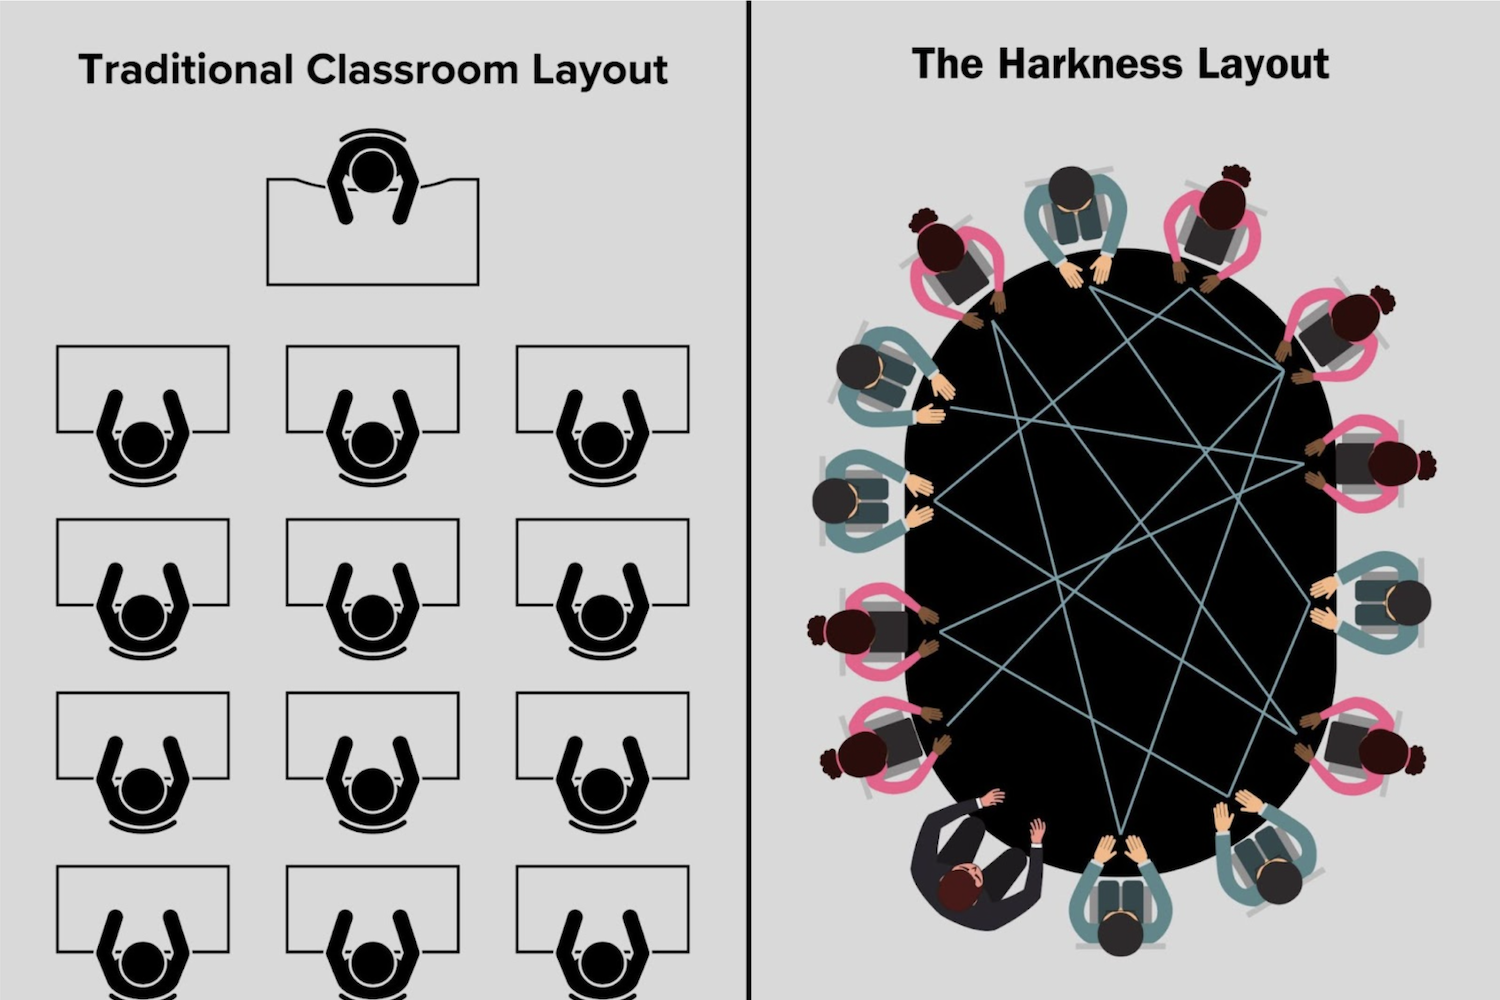 Harkness table layout